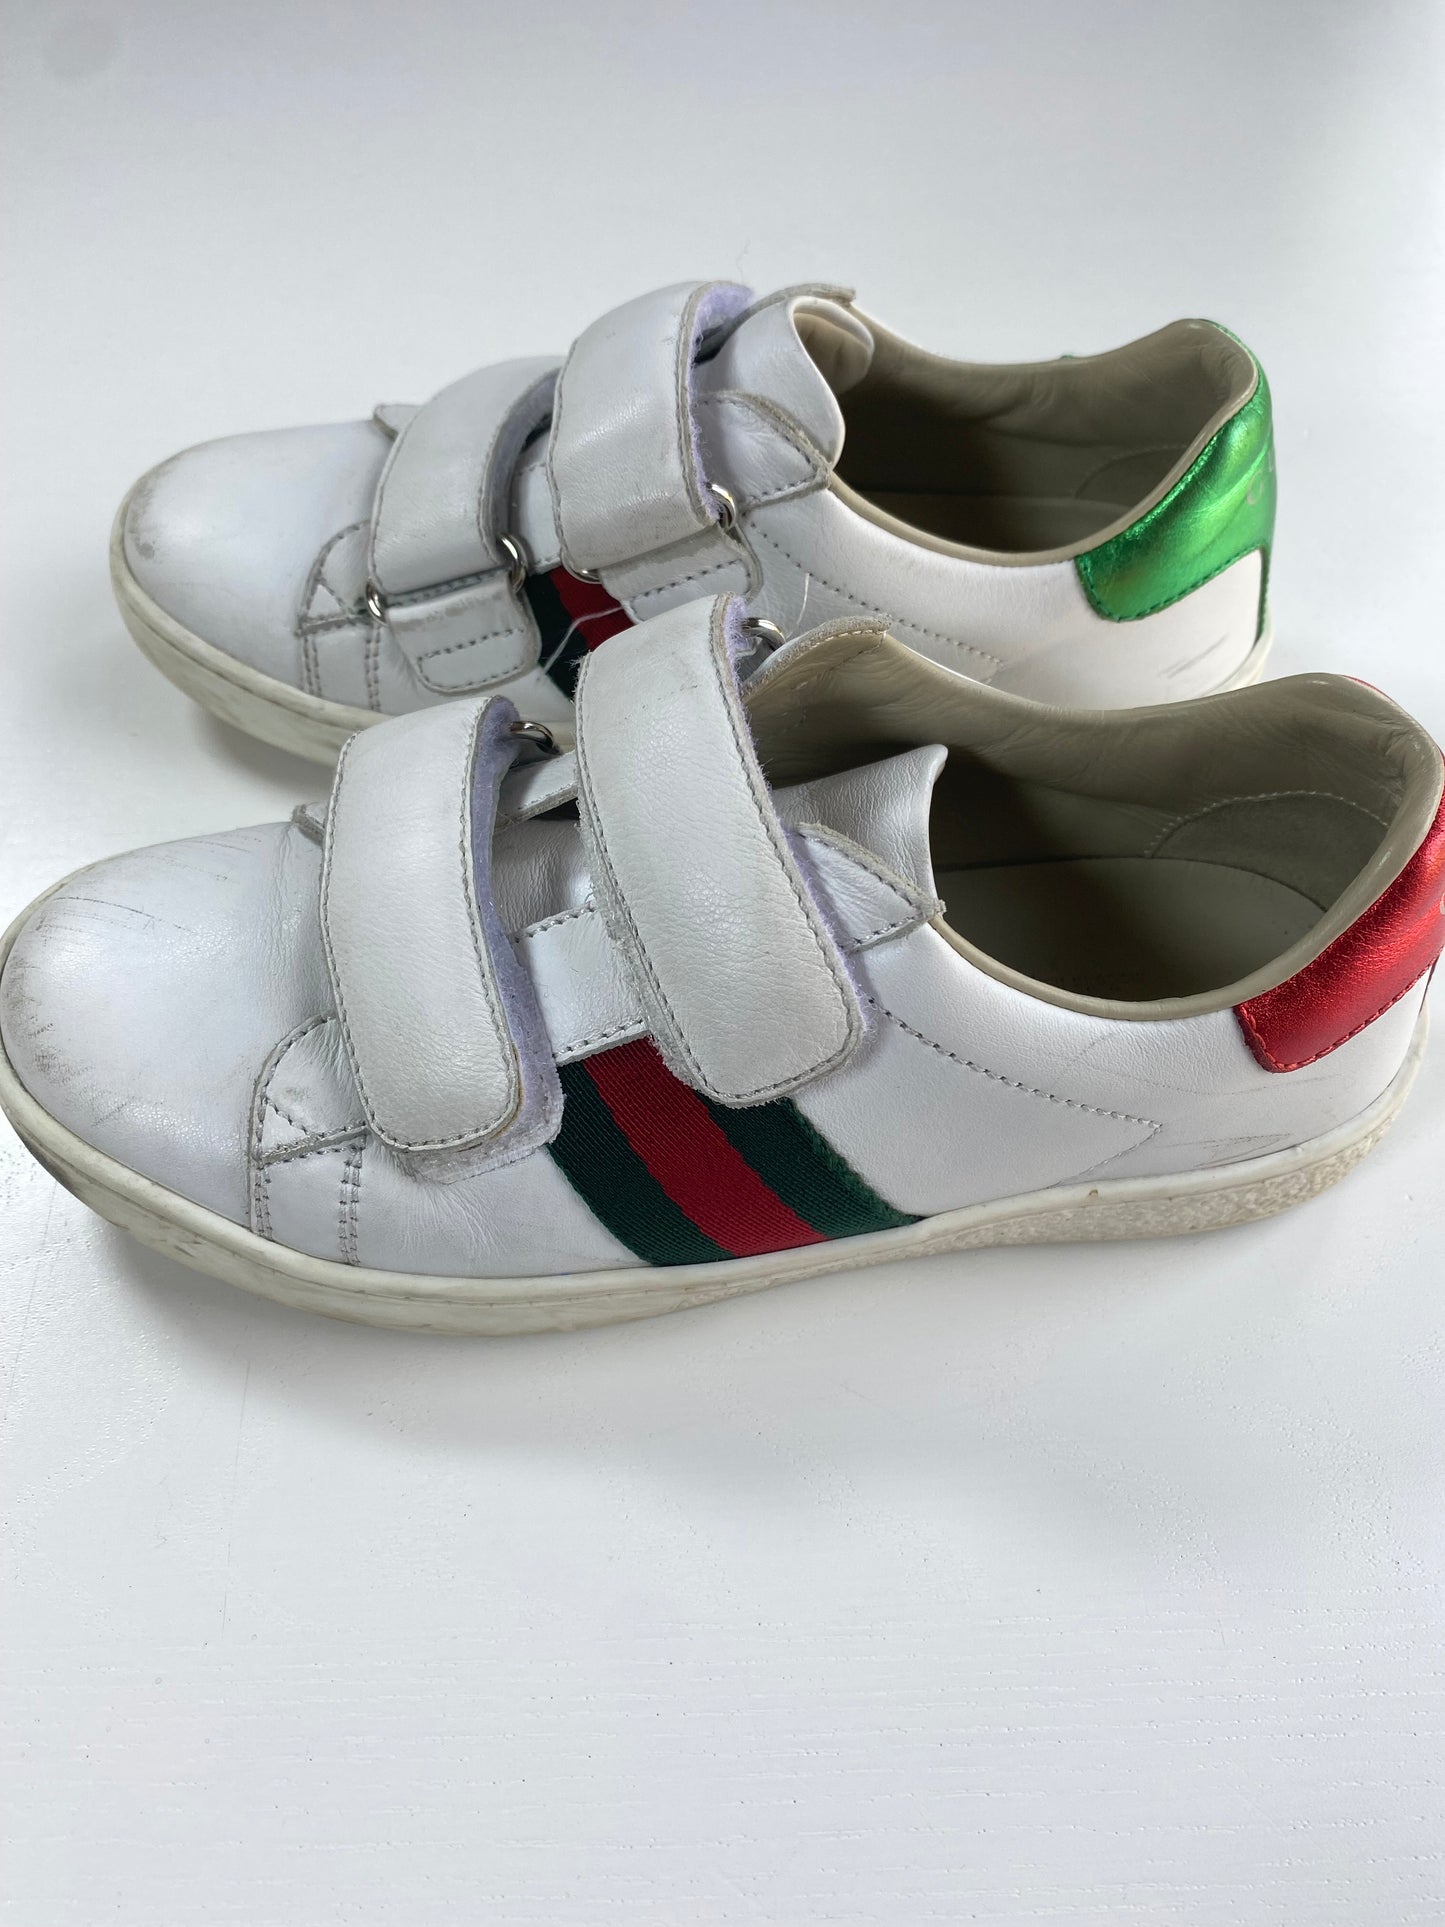 GUCCI sneakers/ 30-12.5